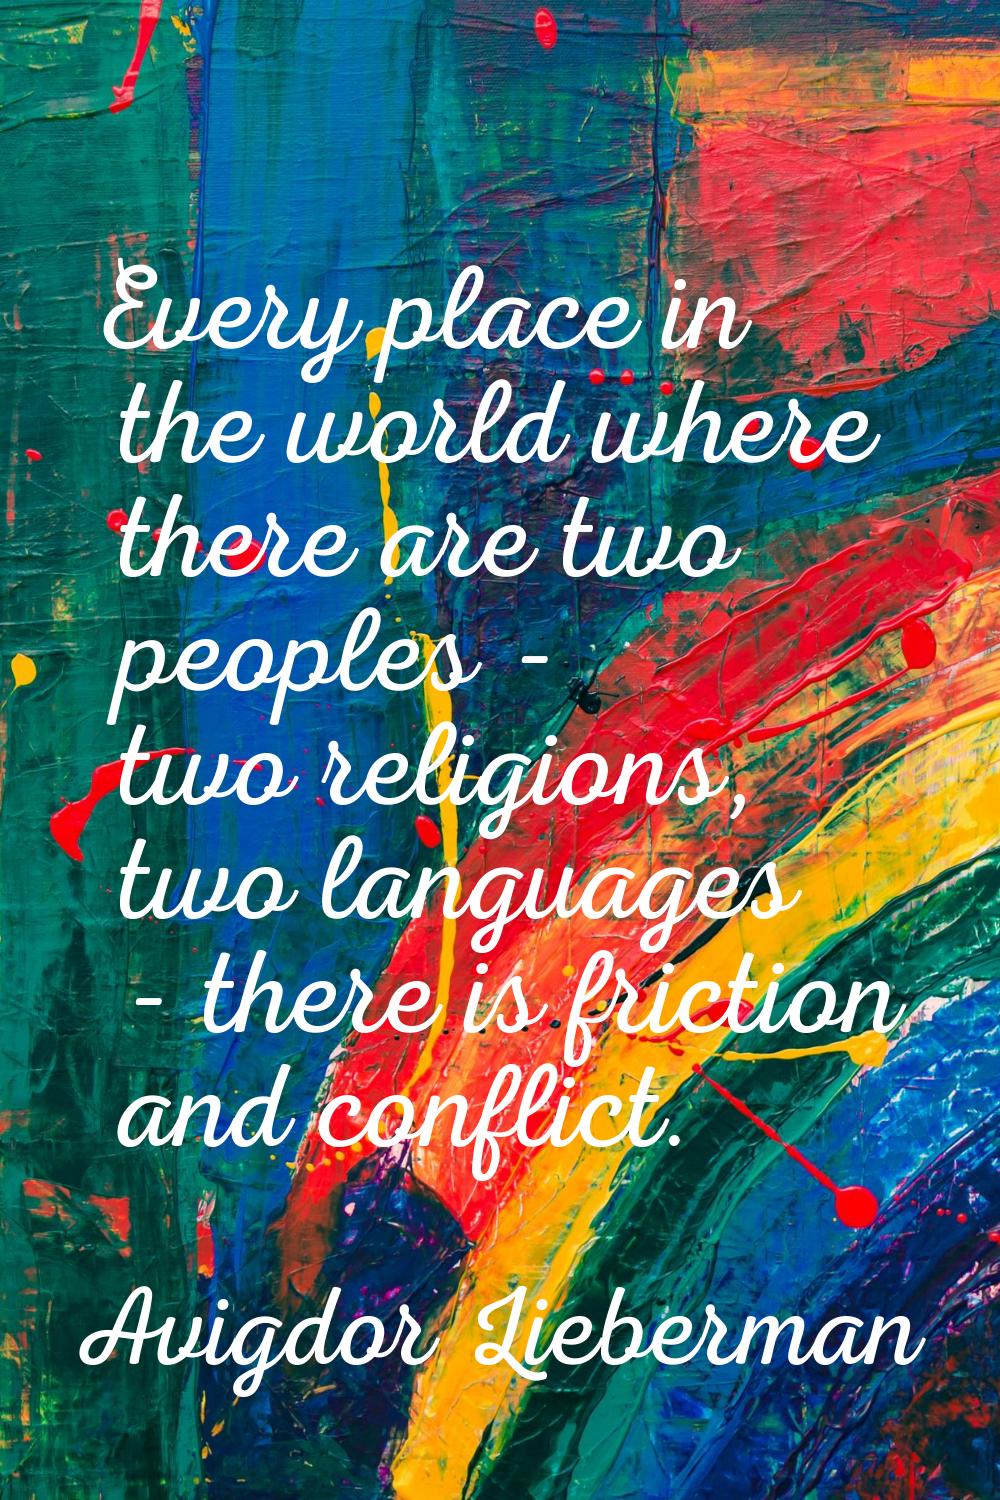 Every place in the world where there are two peoples - two religions, two languages - there is fric